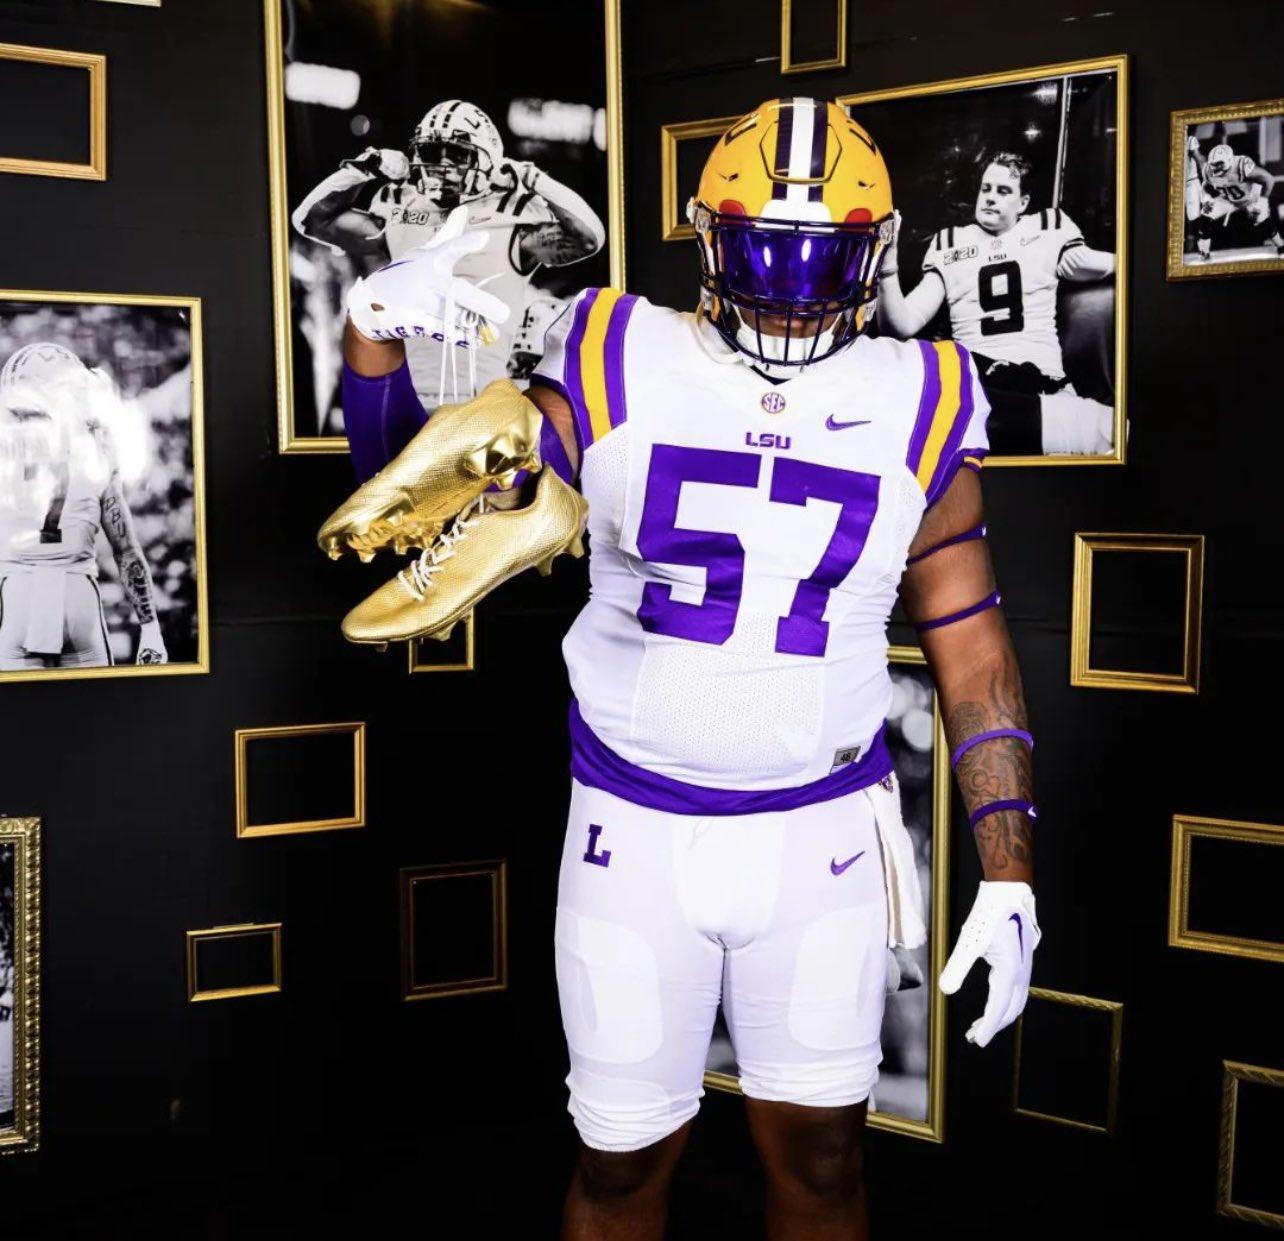 Football player in LSU uniform holding gold cleats.